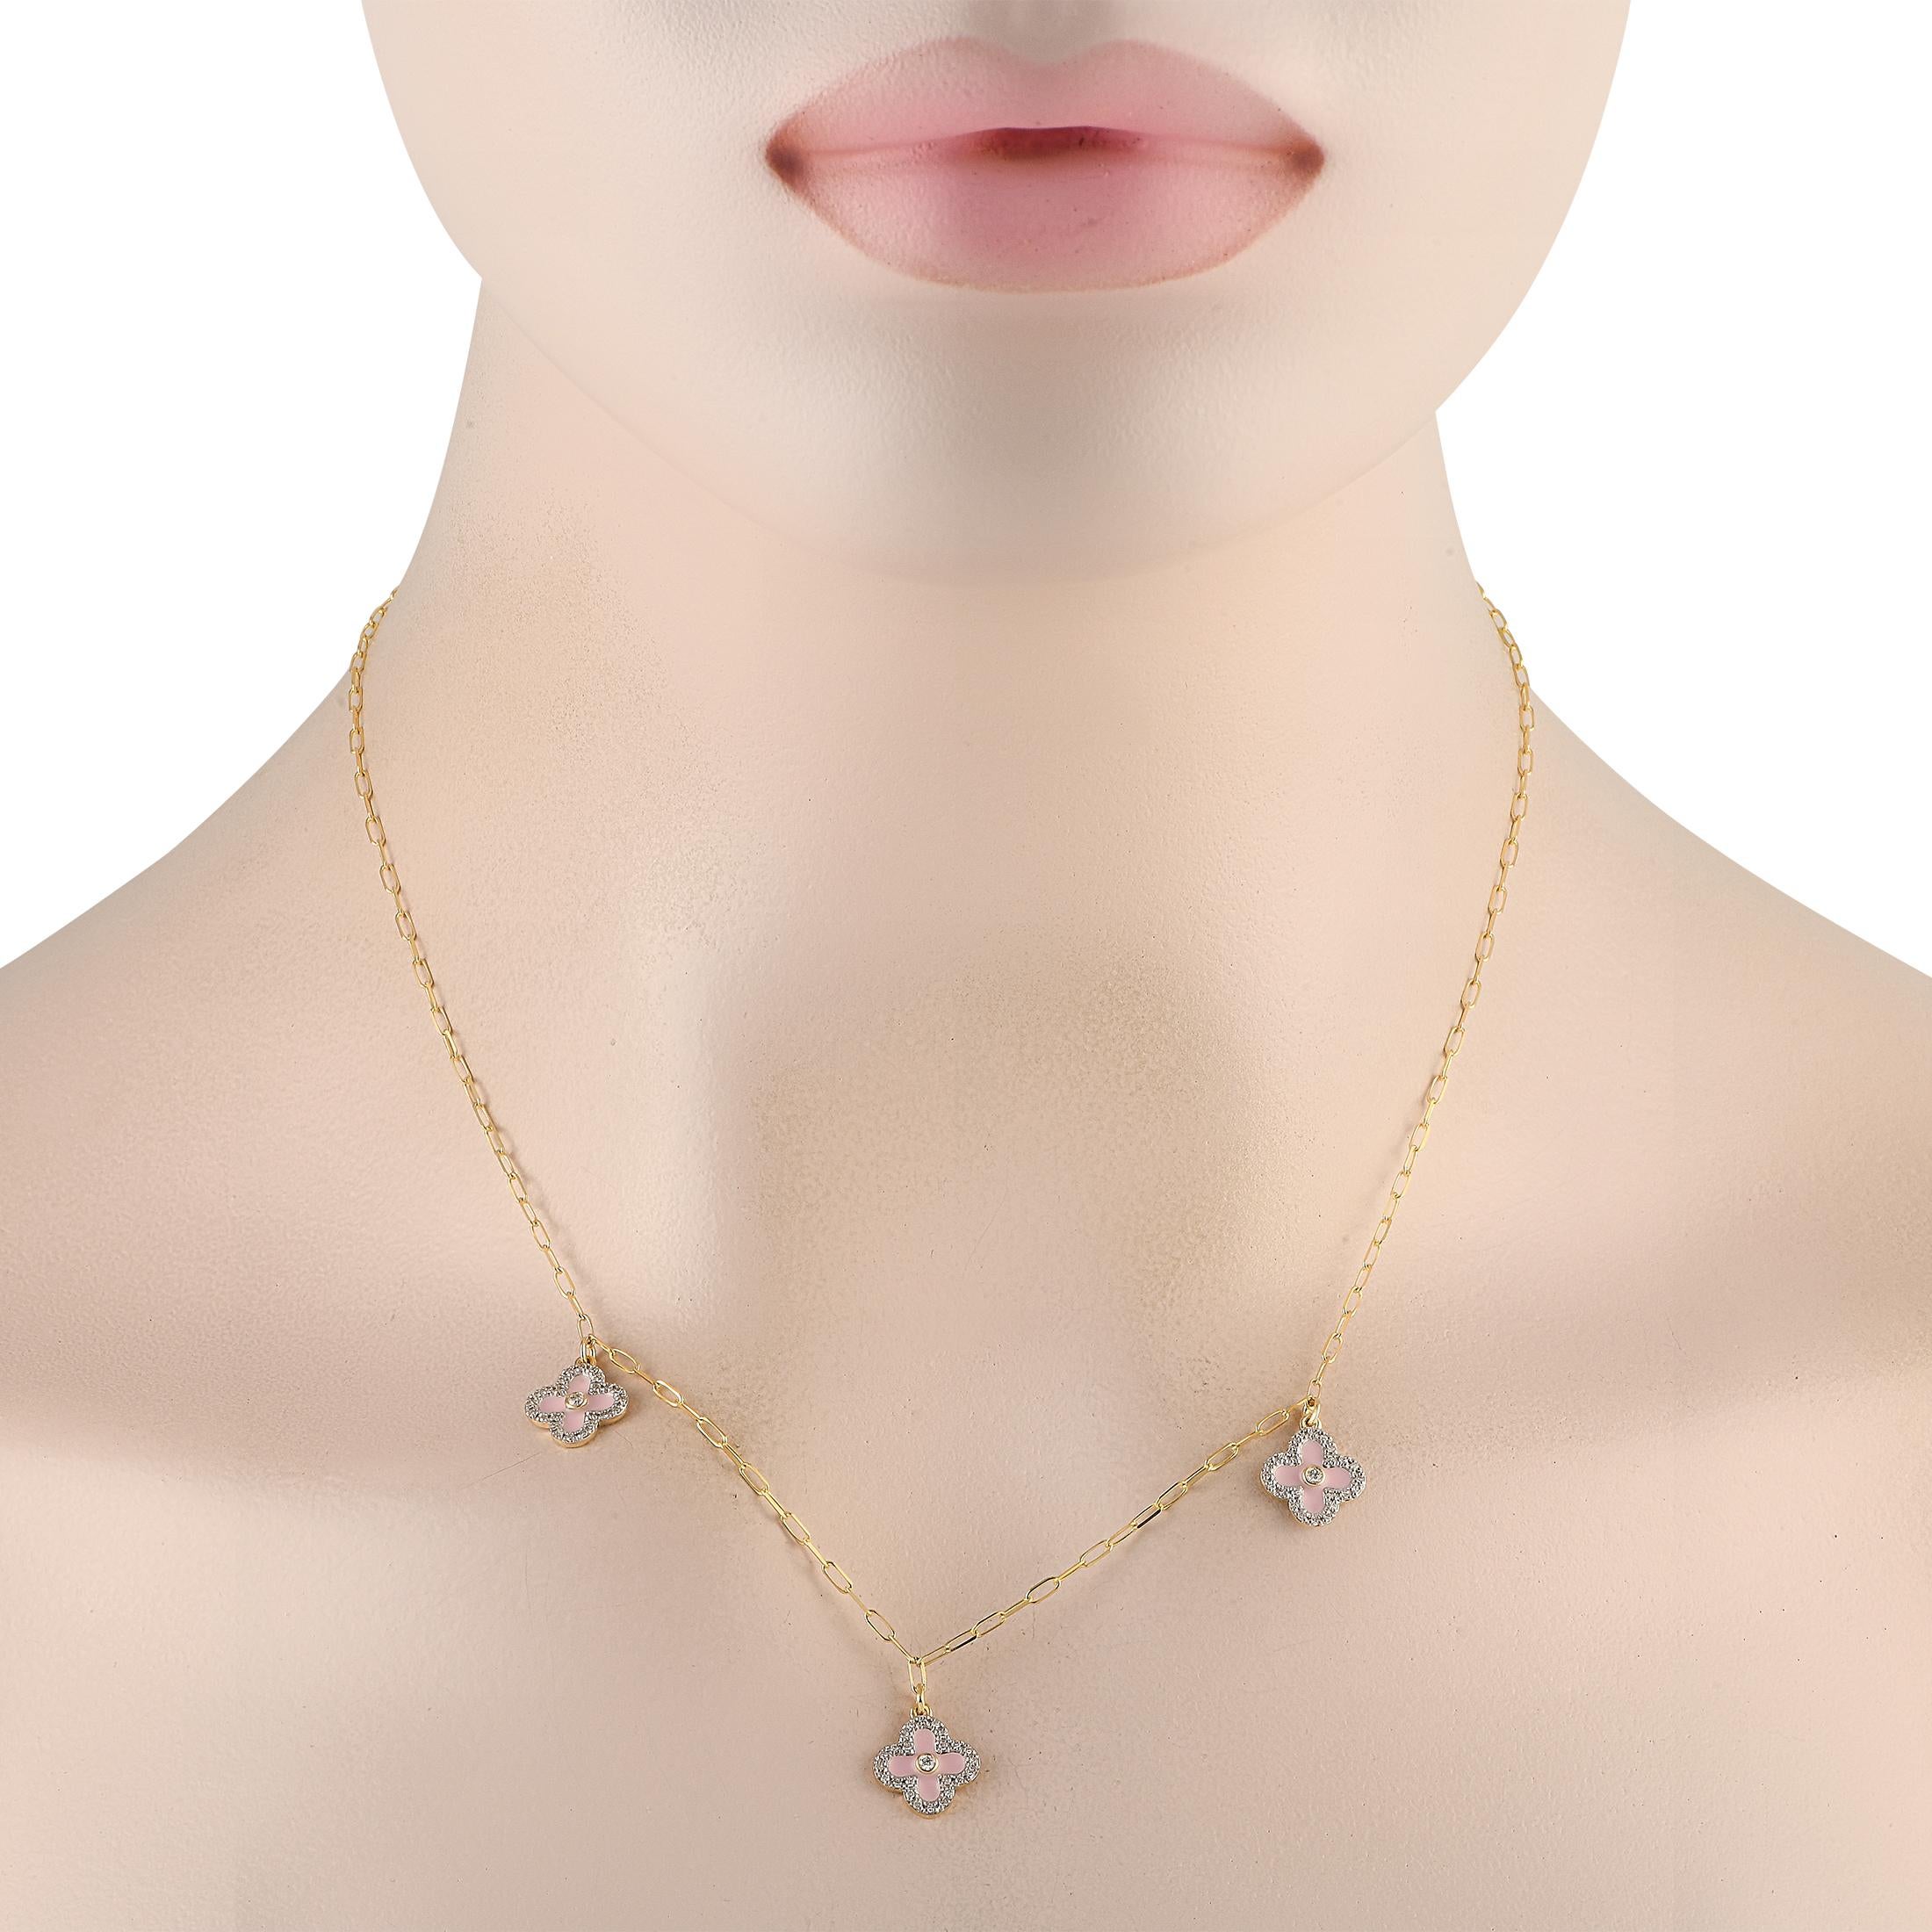 Add a touch of charm and sophistication to any ensemble with this exquisite 14K Yellow Gold necklace. Suspended from this pieces chic paperclip chain, youll find a trio of pink clover-shaped pendants measuring 0.45 round. Together, they beautifully